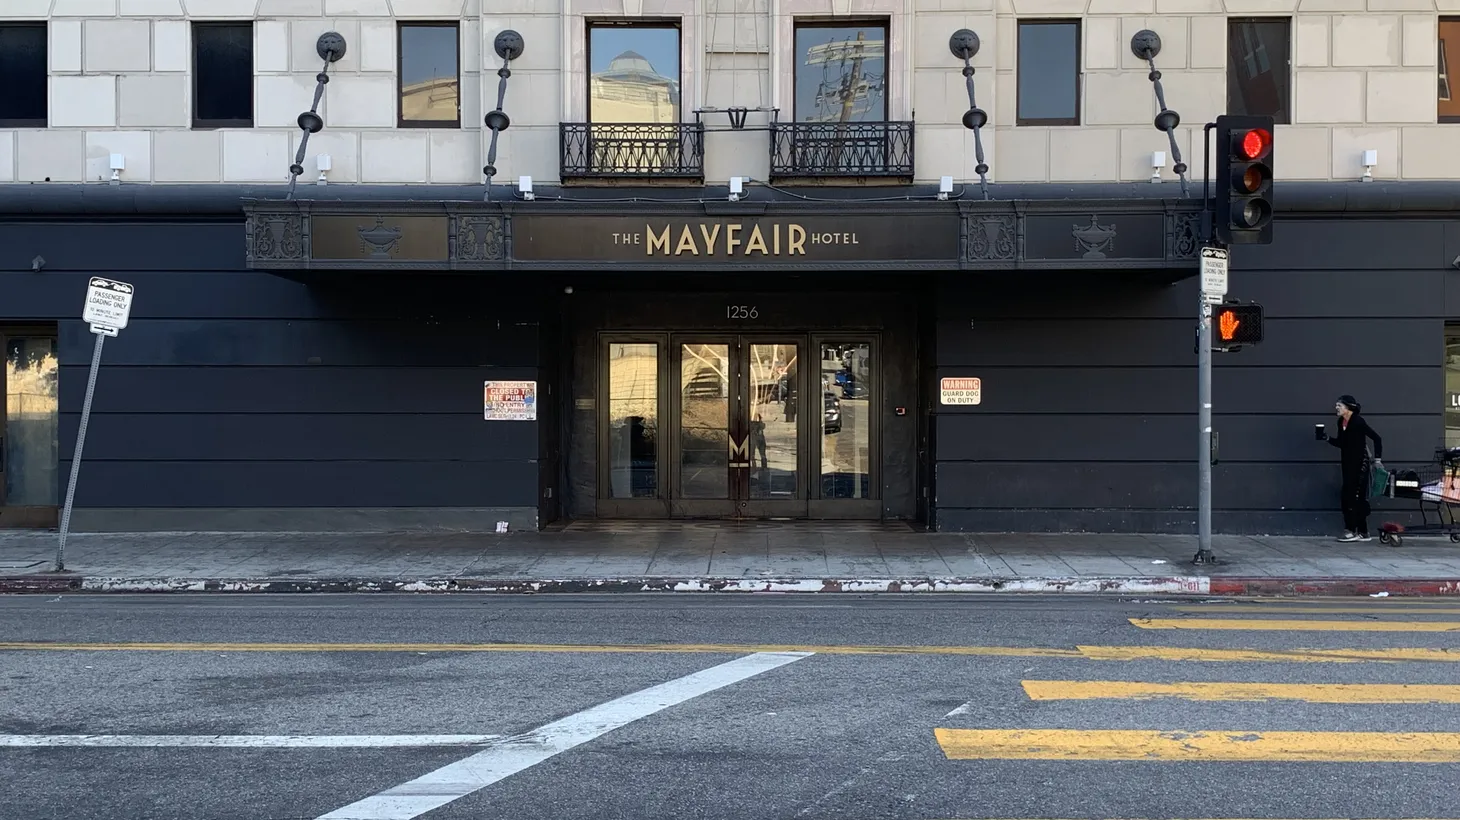 LA is planning to buy the Mayfair Hotel for $60 million and spend another $23 million to renovate it into housing for people experiencing homelessness.